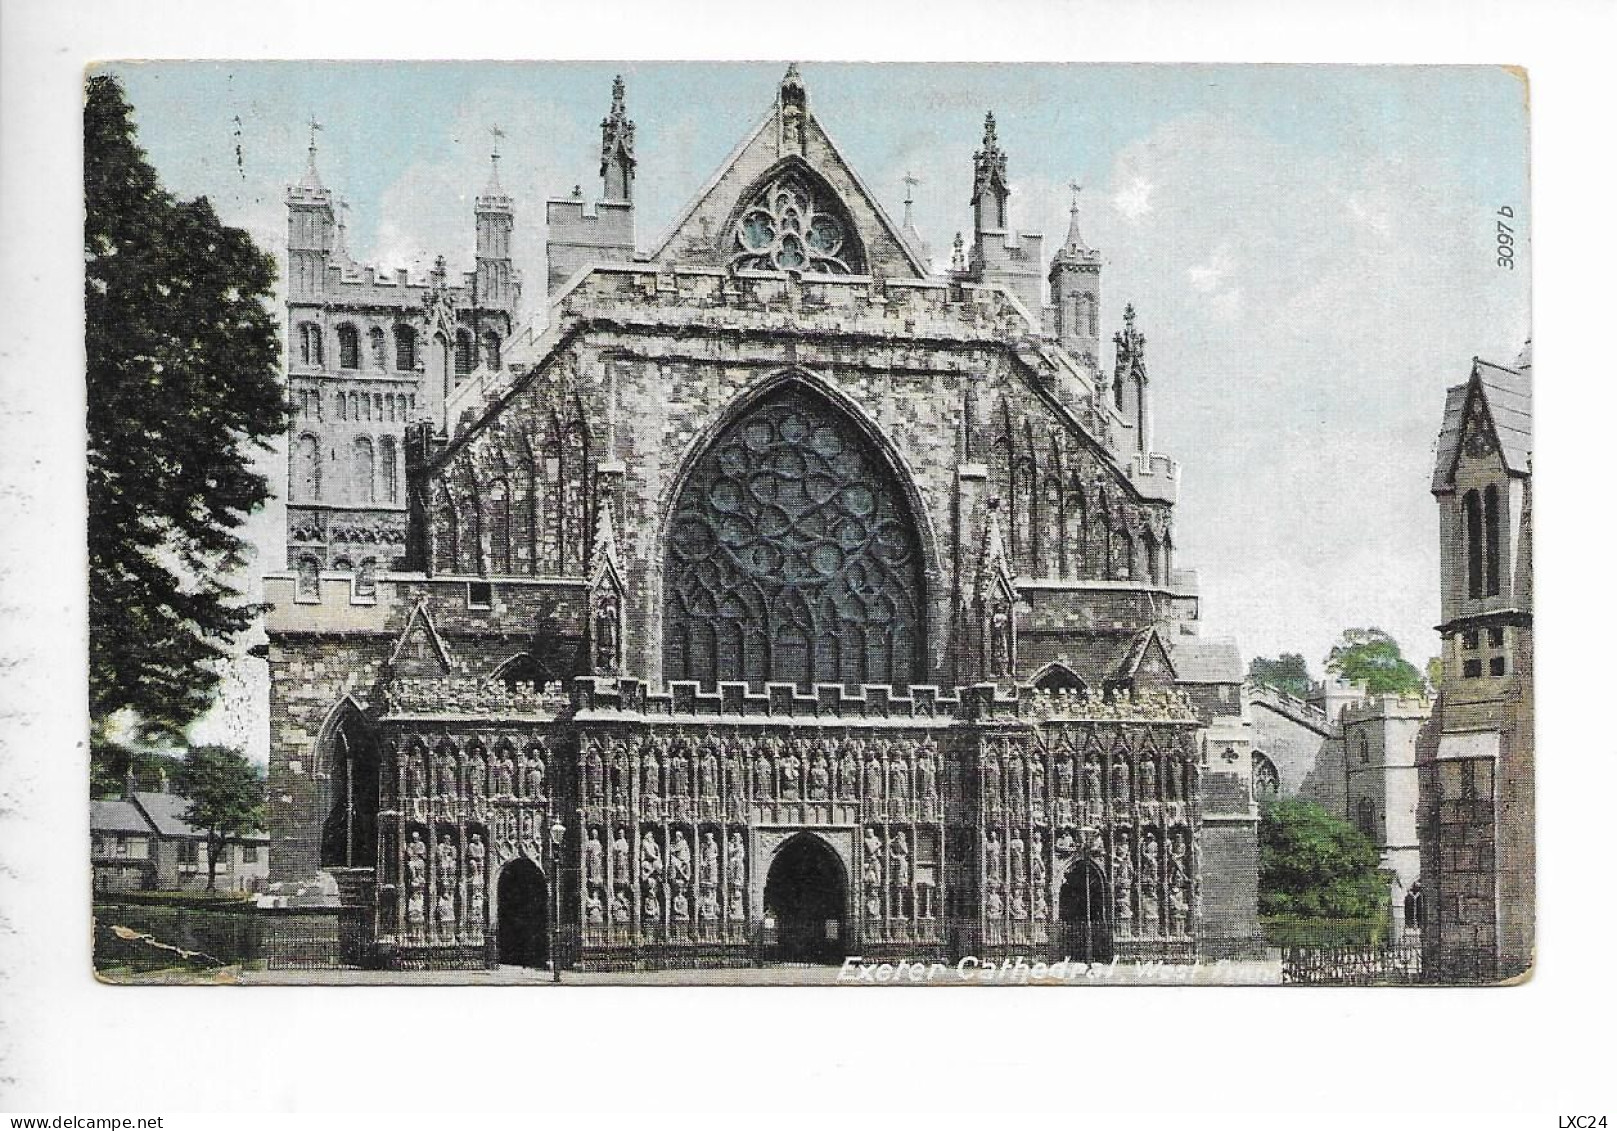 EXETER CATHEDRAL. WEST FRONT. - Exeter